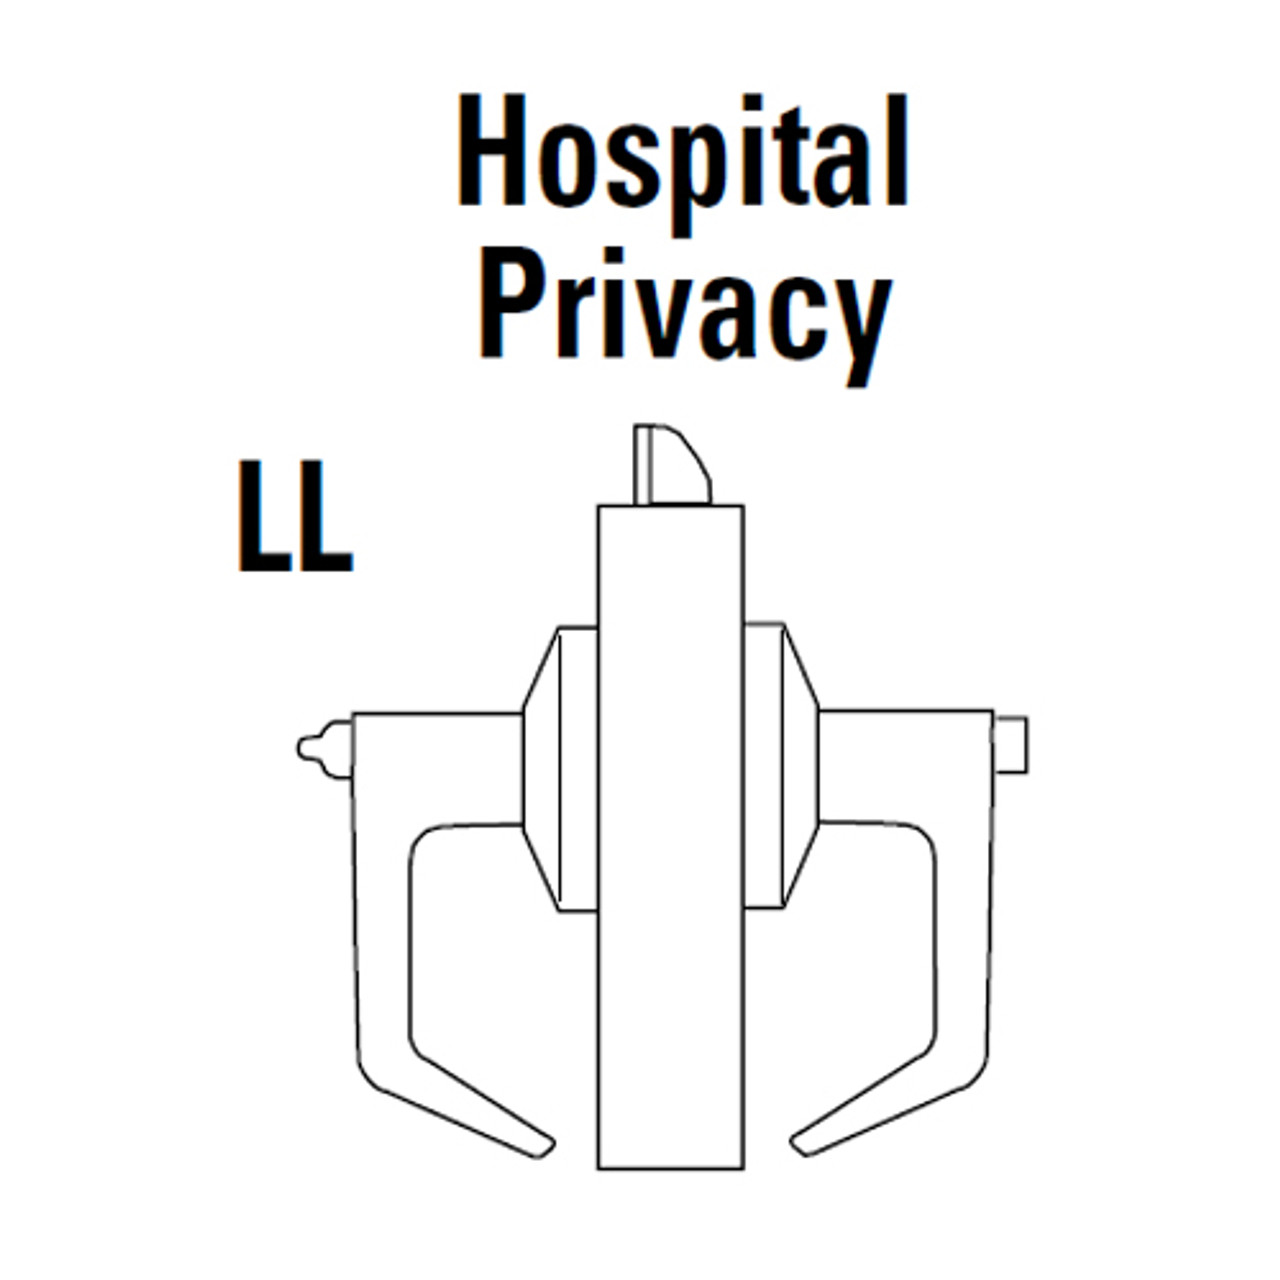 9K30LL15KS3618 Best 9K Series Hospital Privacy Heavy Duty Cylindrical Lever Locks with Contour Angle with Return Lever Design in Bright Nickel